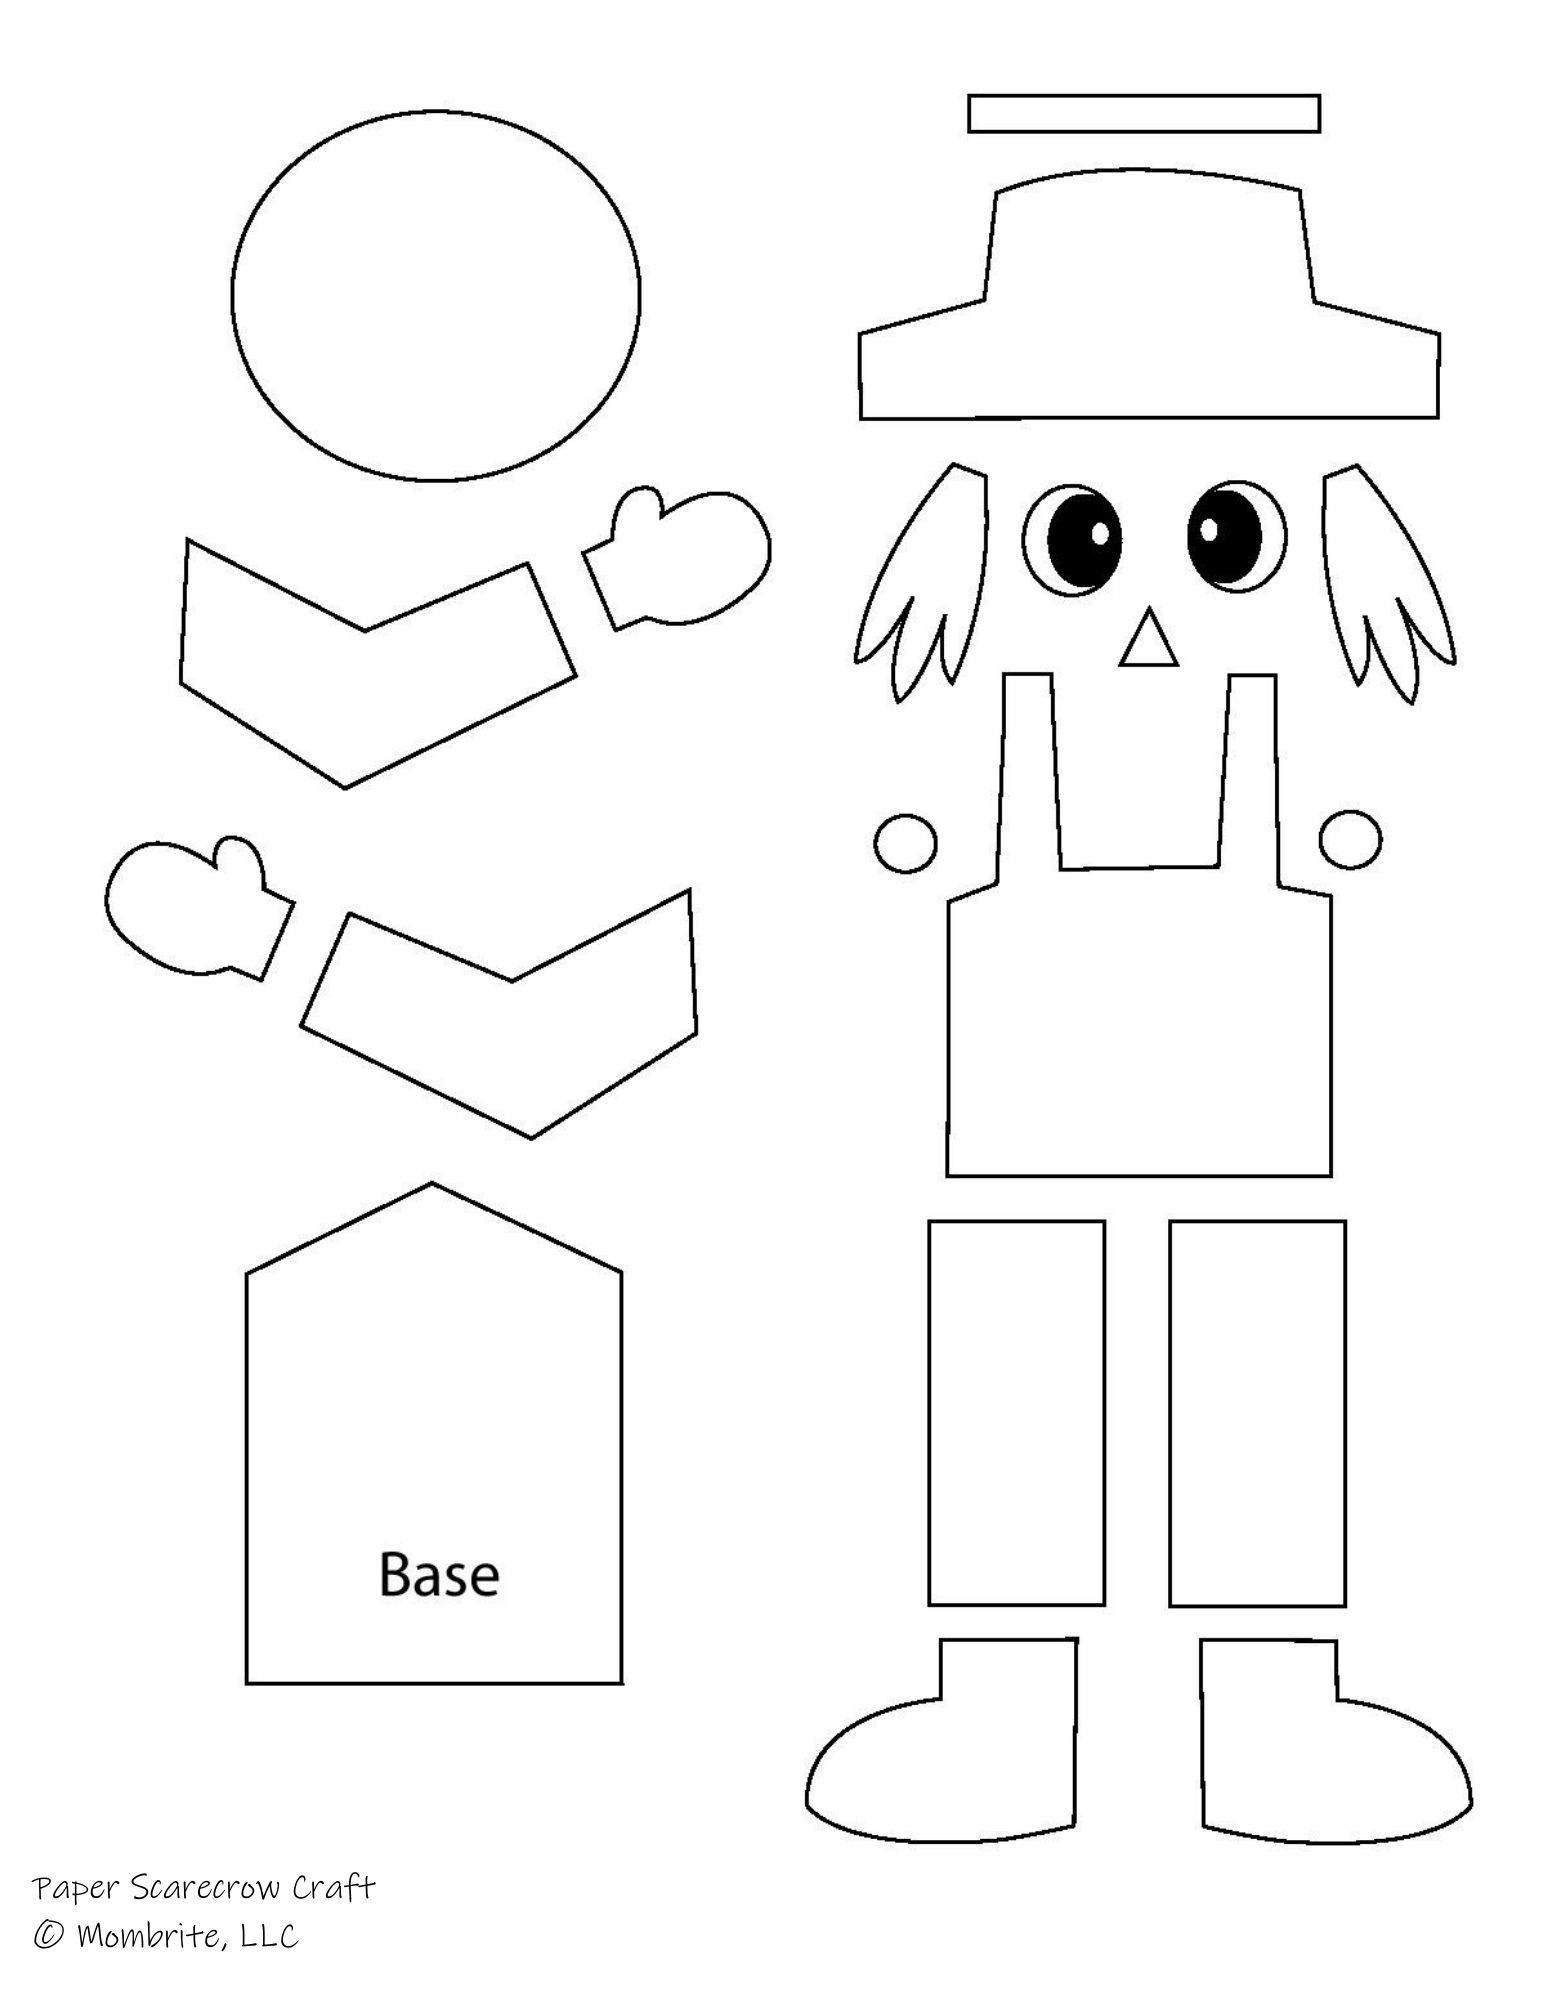 Free Paper Scarecrow Craft Template